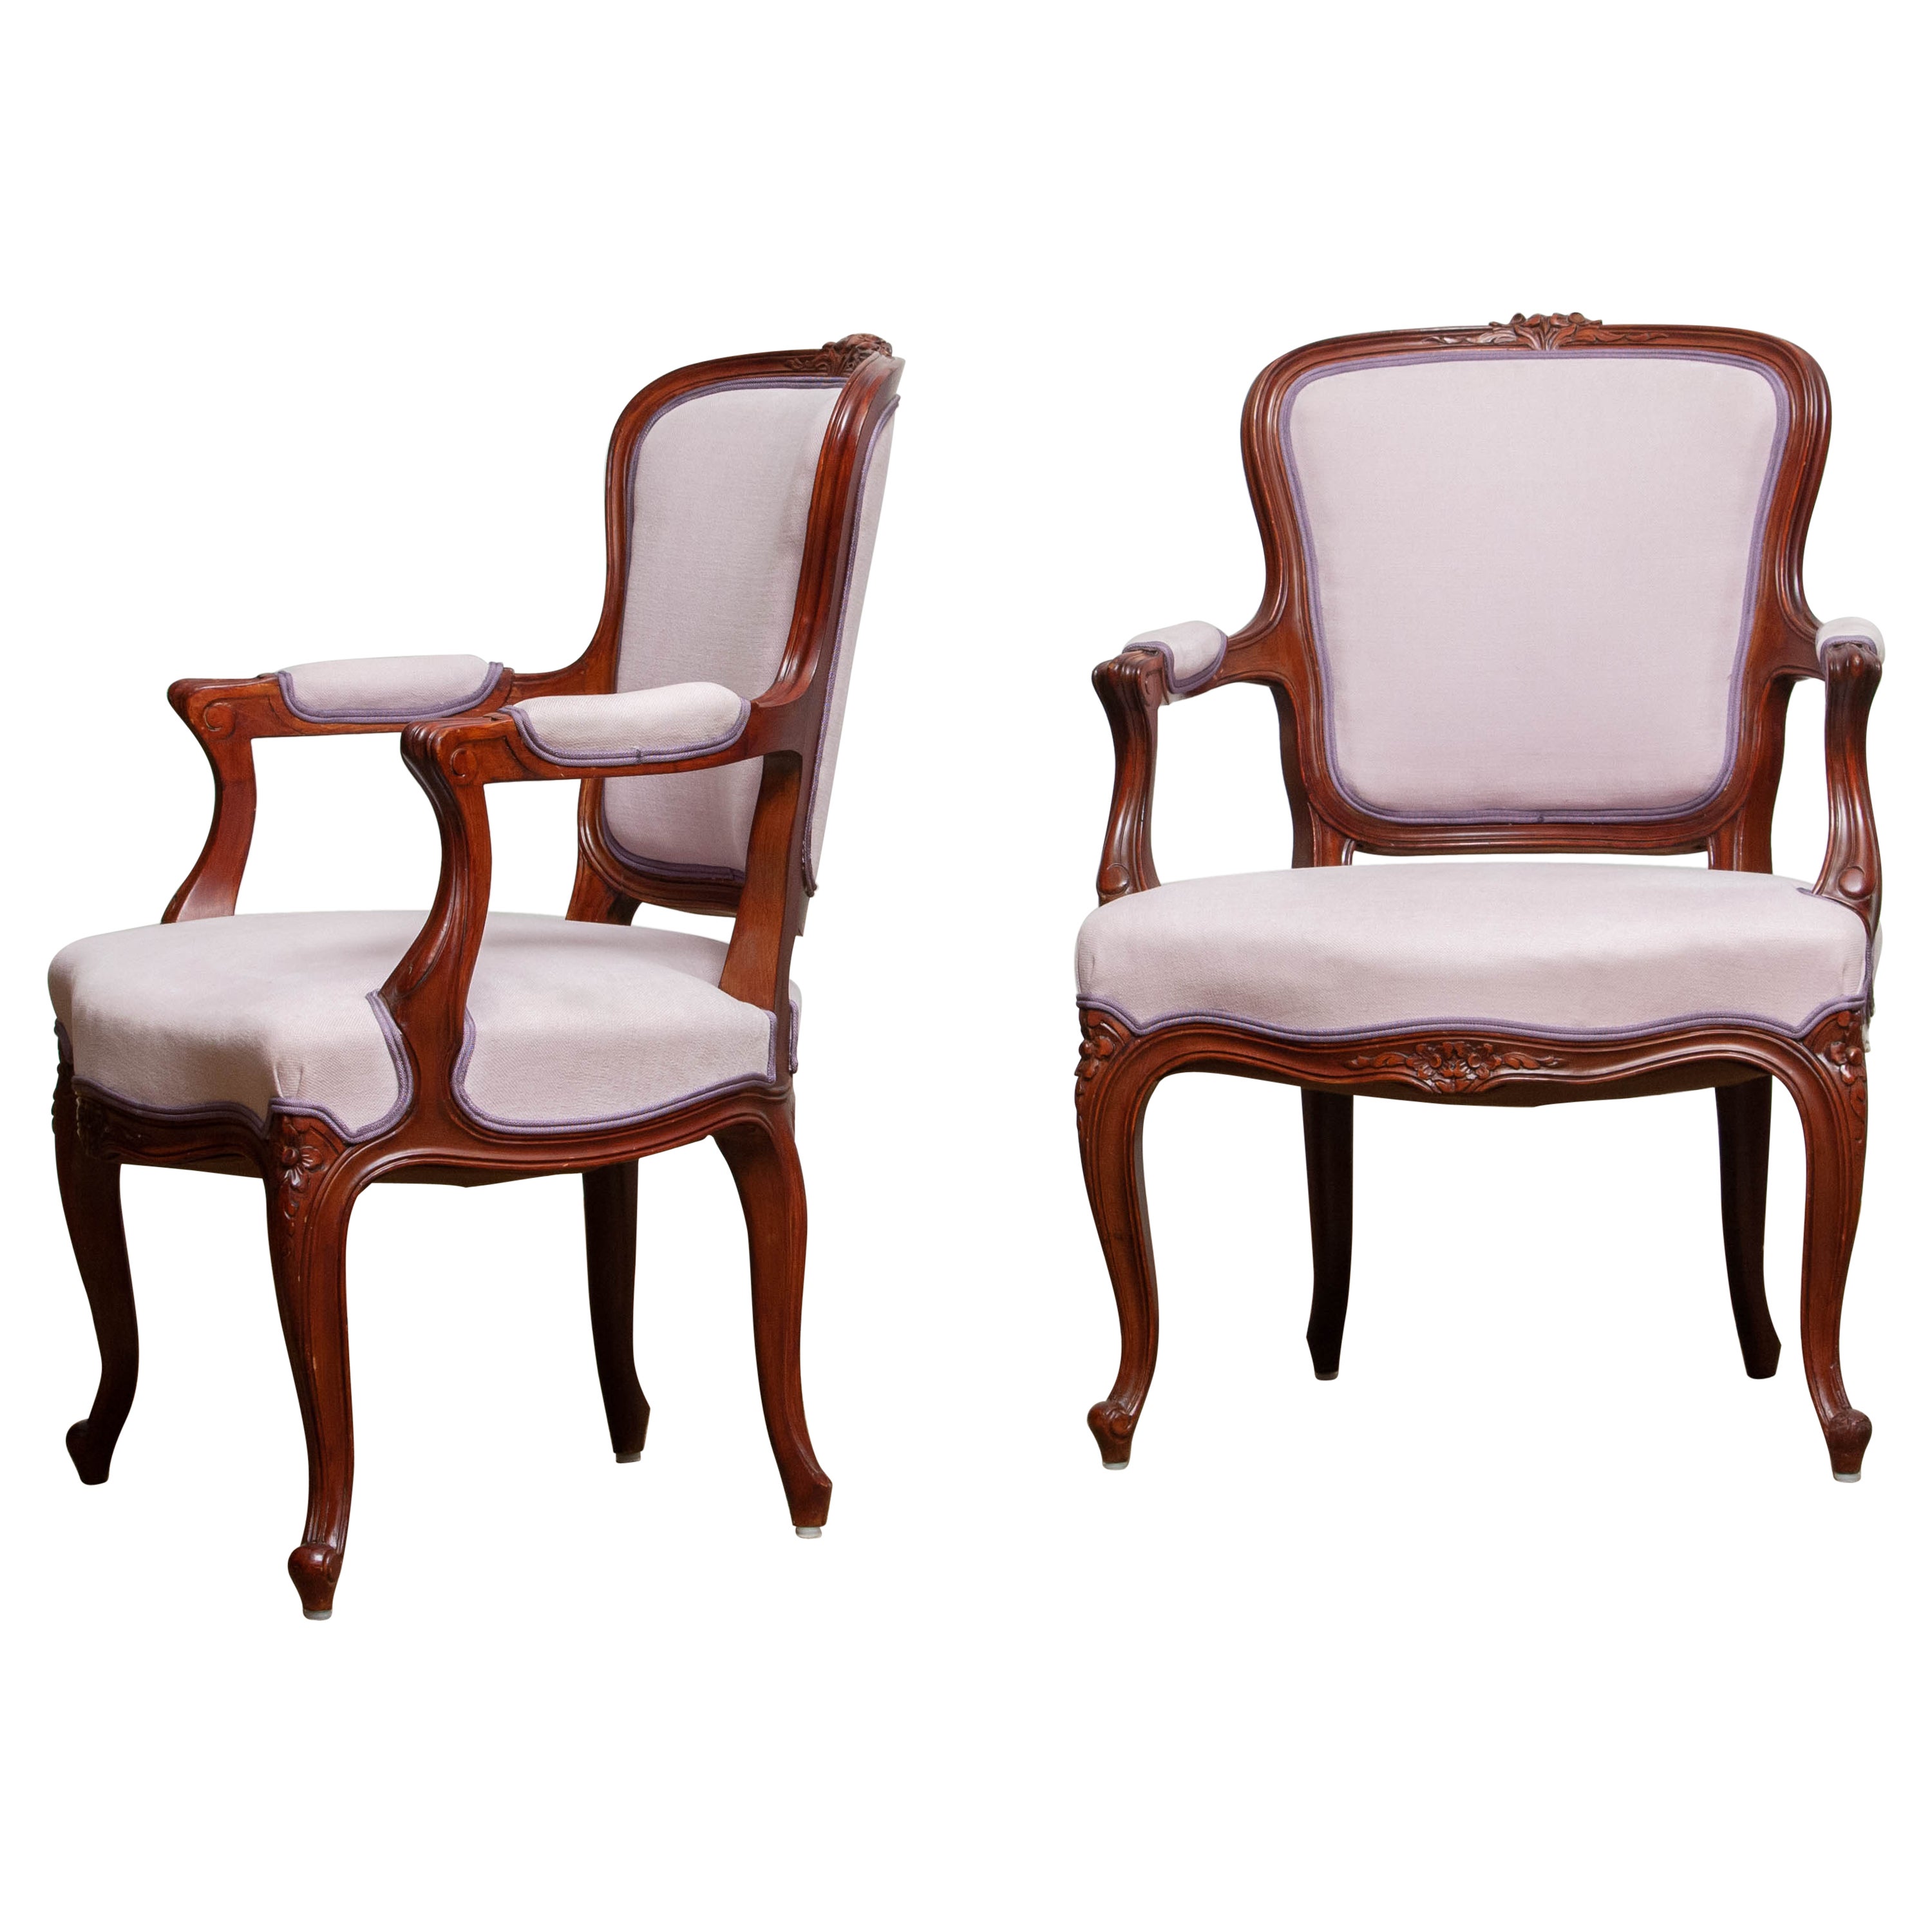 1950s Pair of Pink Swedish Rococo Bergère in the Shabby Chic Technique Chairs